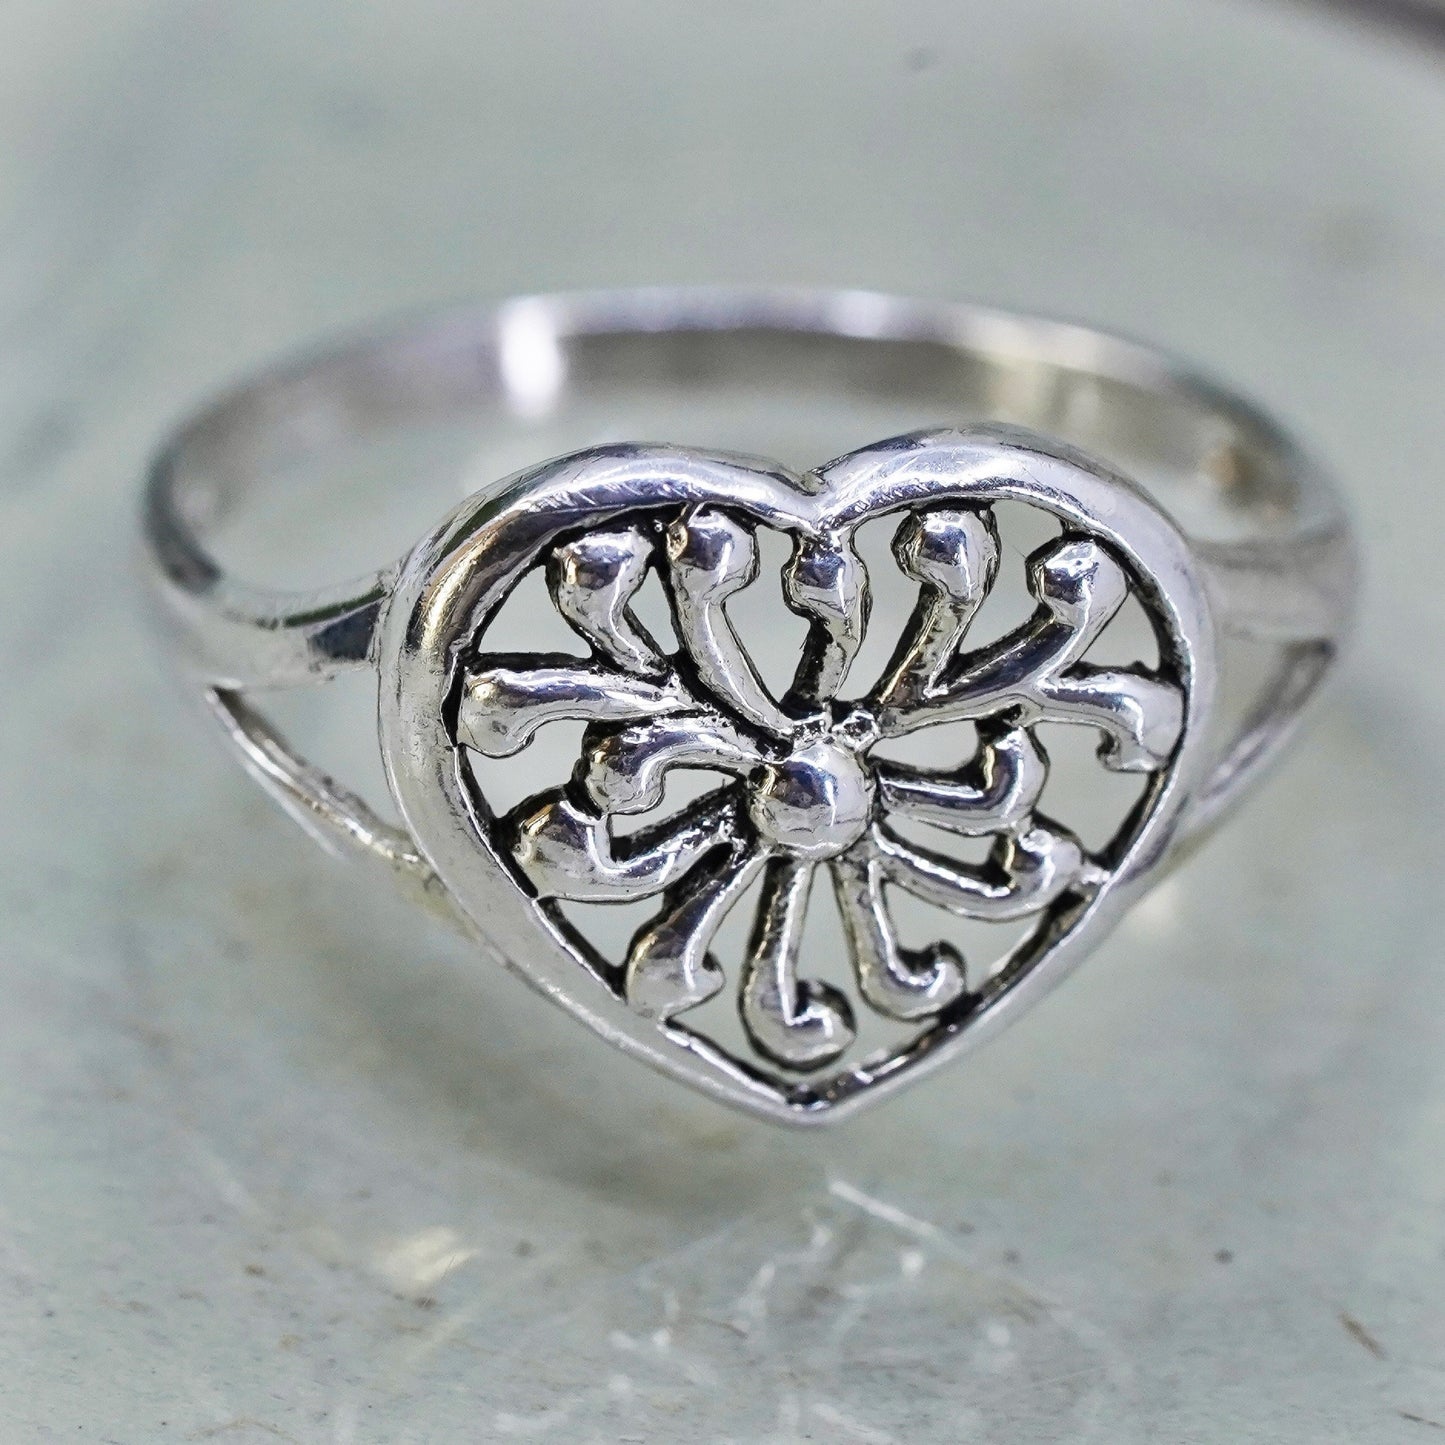 Size 7.5, Vintage sterling silver handmade wired ring, 925 filigree heart band